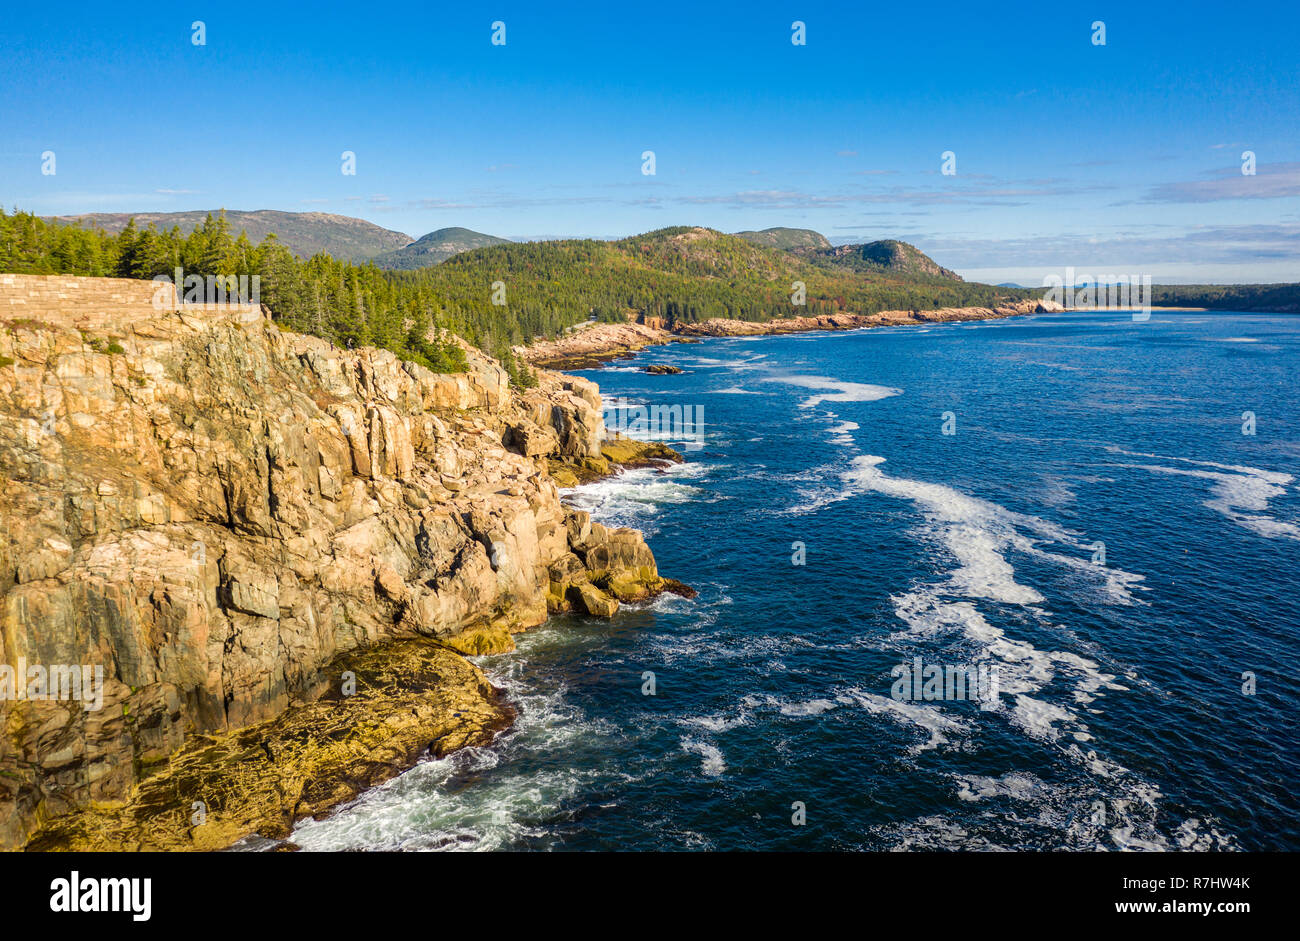 Aerial view of Acadia shore in Maine Stock Photo